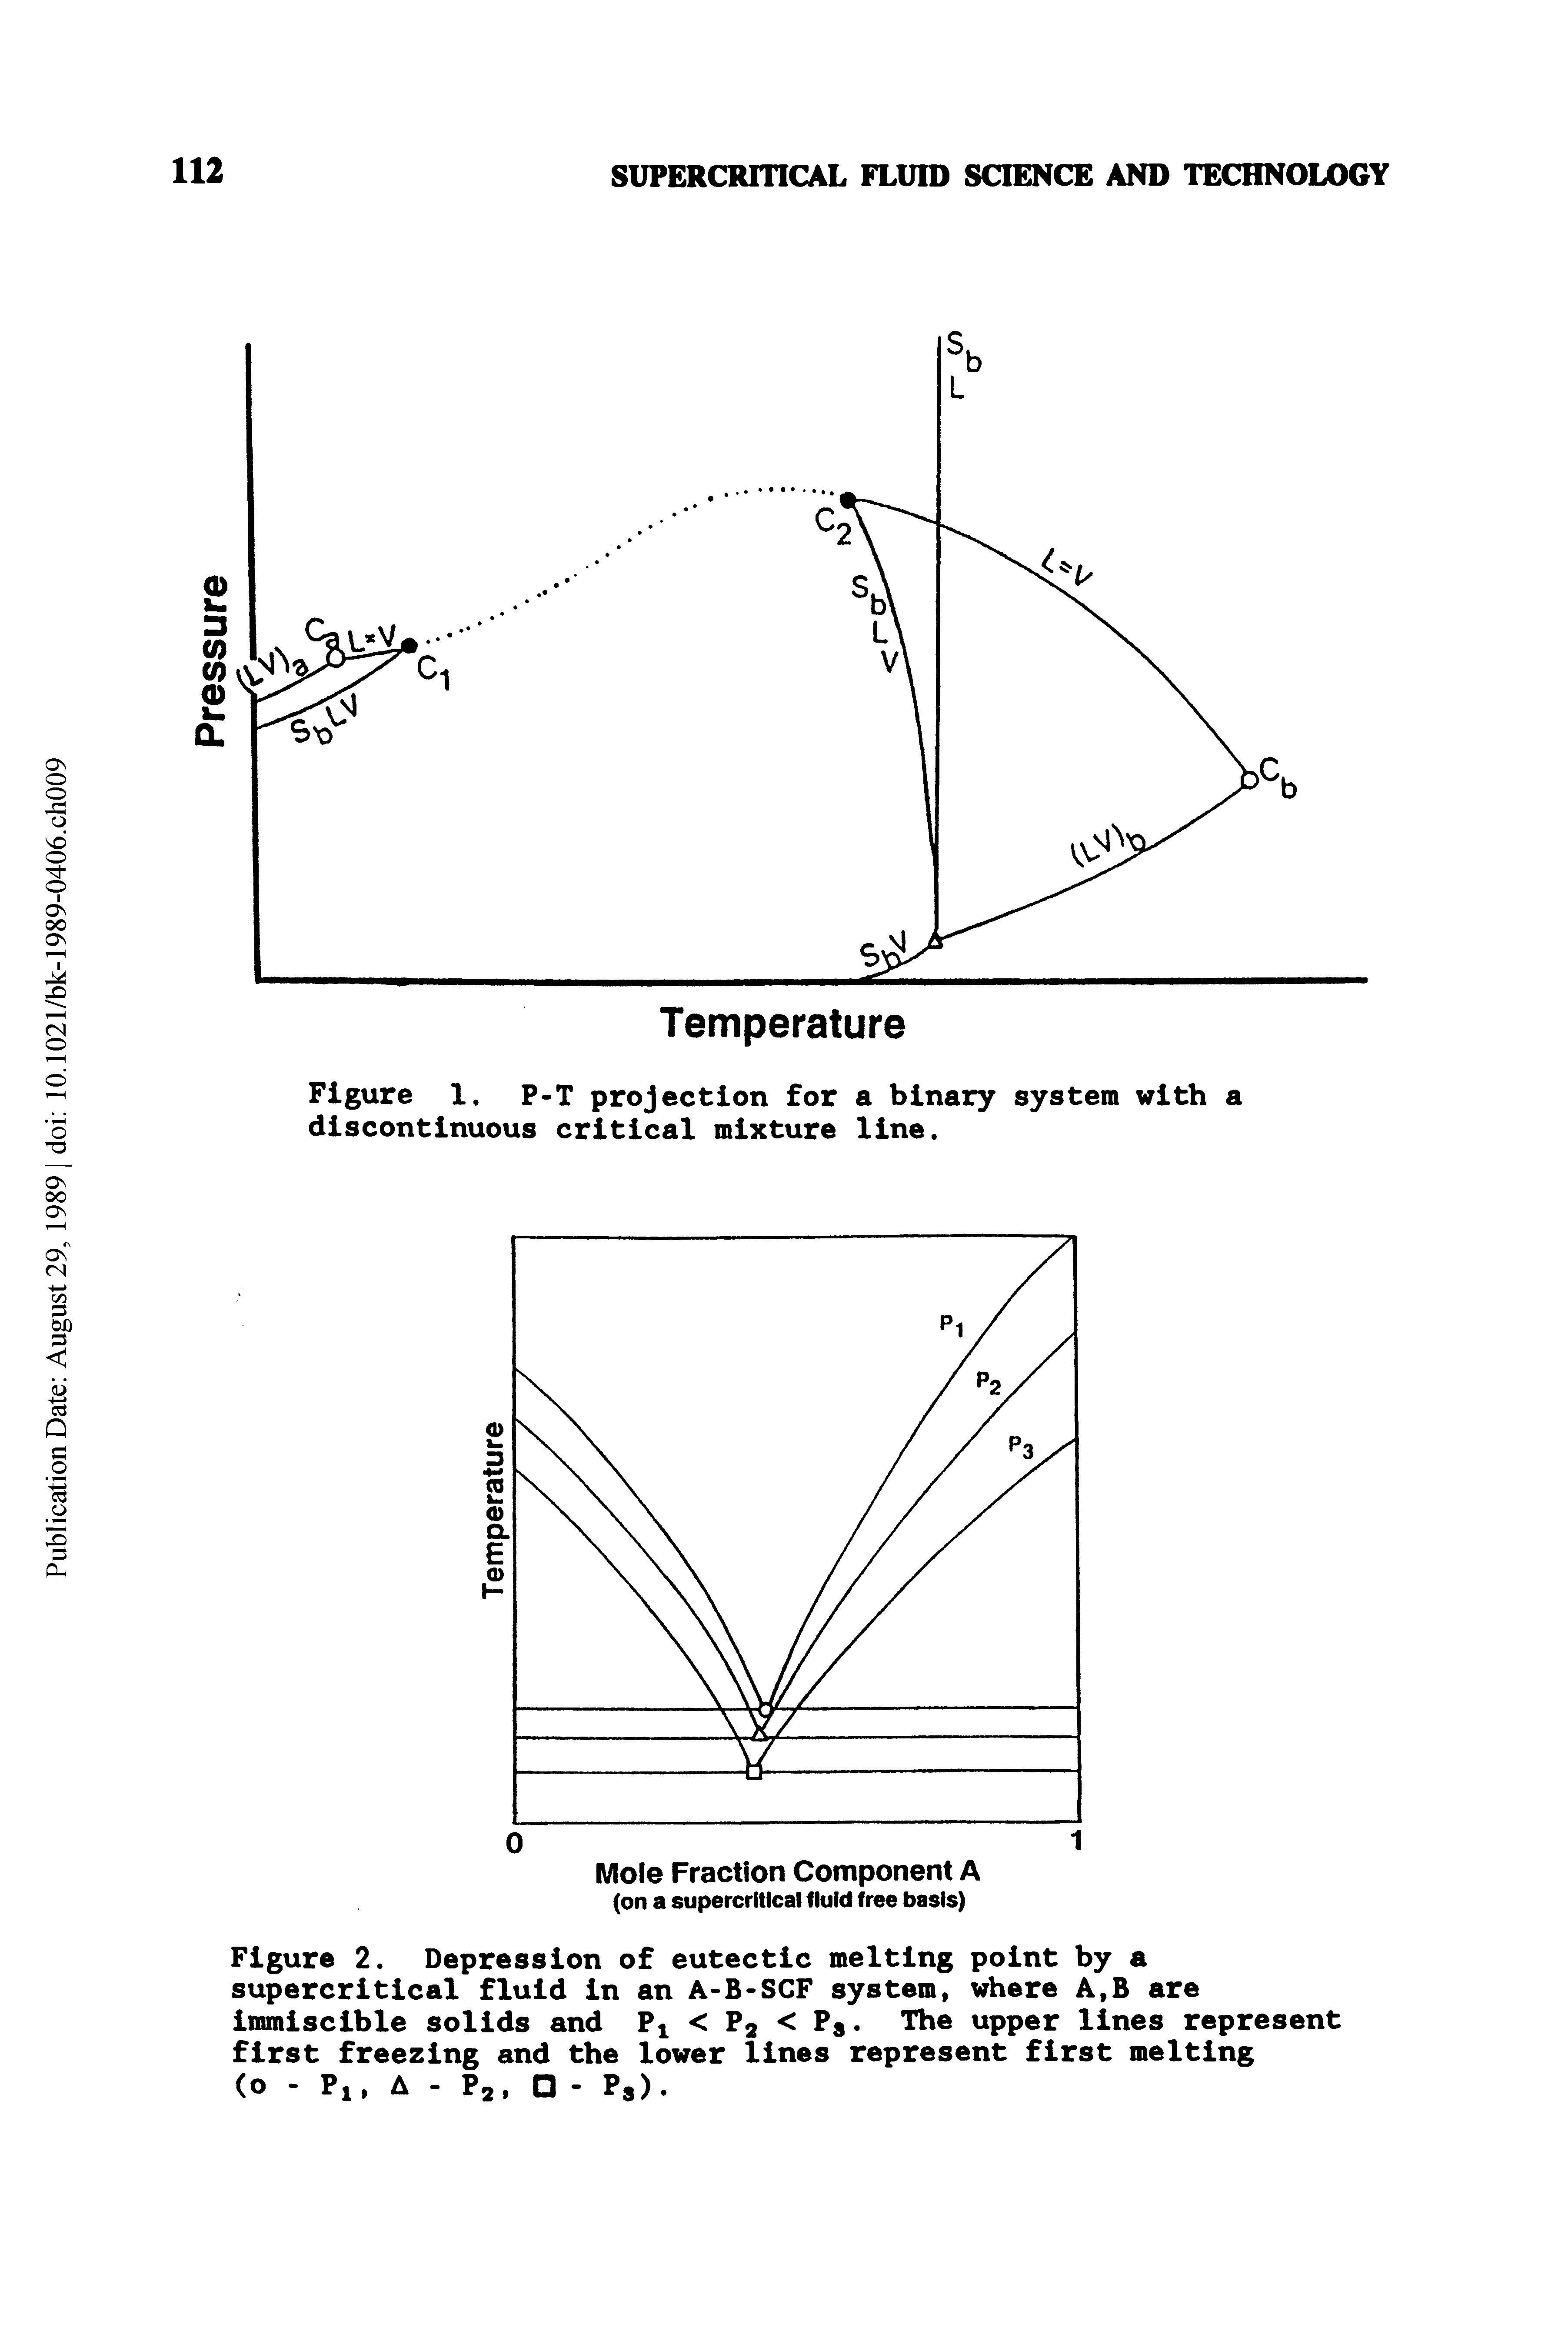 Figure 2. Depression of eutectic melting point by a supercritical fluid in an A-B-SCF system, where A,B are immiscible solids and Pj < Pa < Ps- 5 upper lines represent first freezing and the lower lines represent first melting (o Pi A - Pa, - Ps) ...